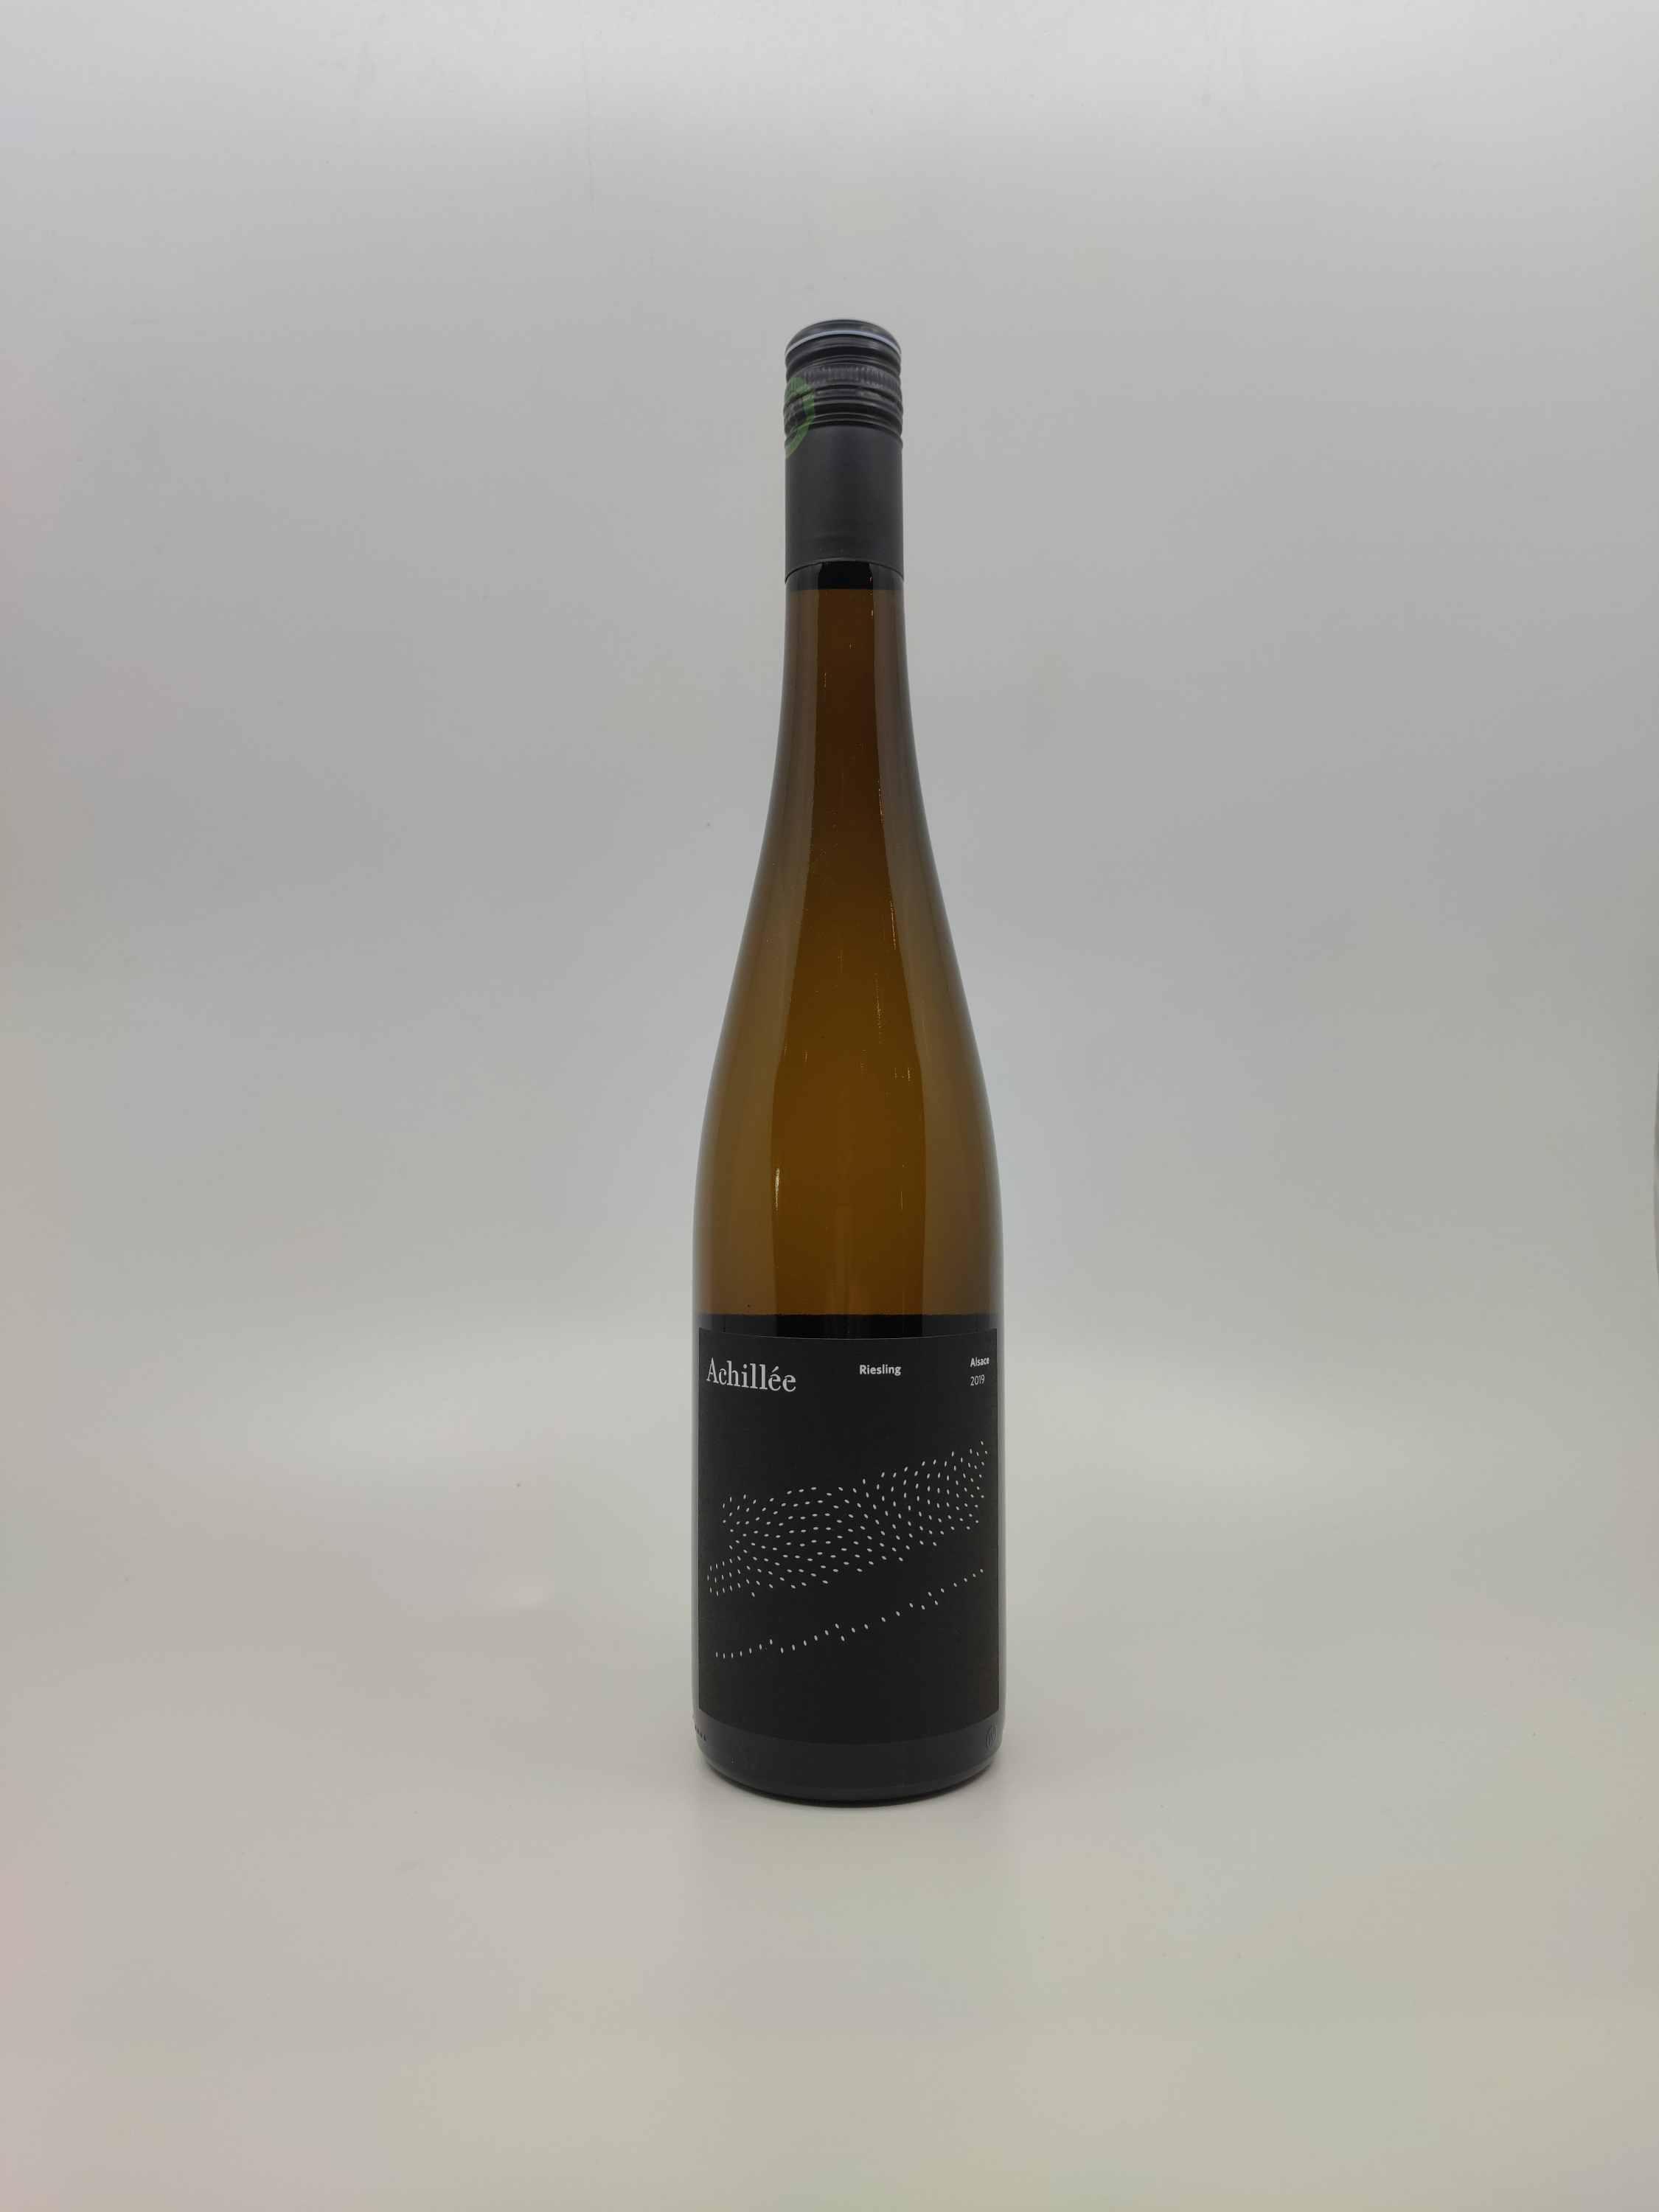 ALSACE Riesling ACHILLEE 2019